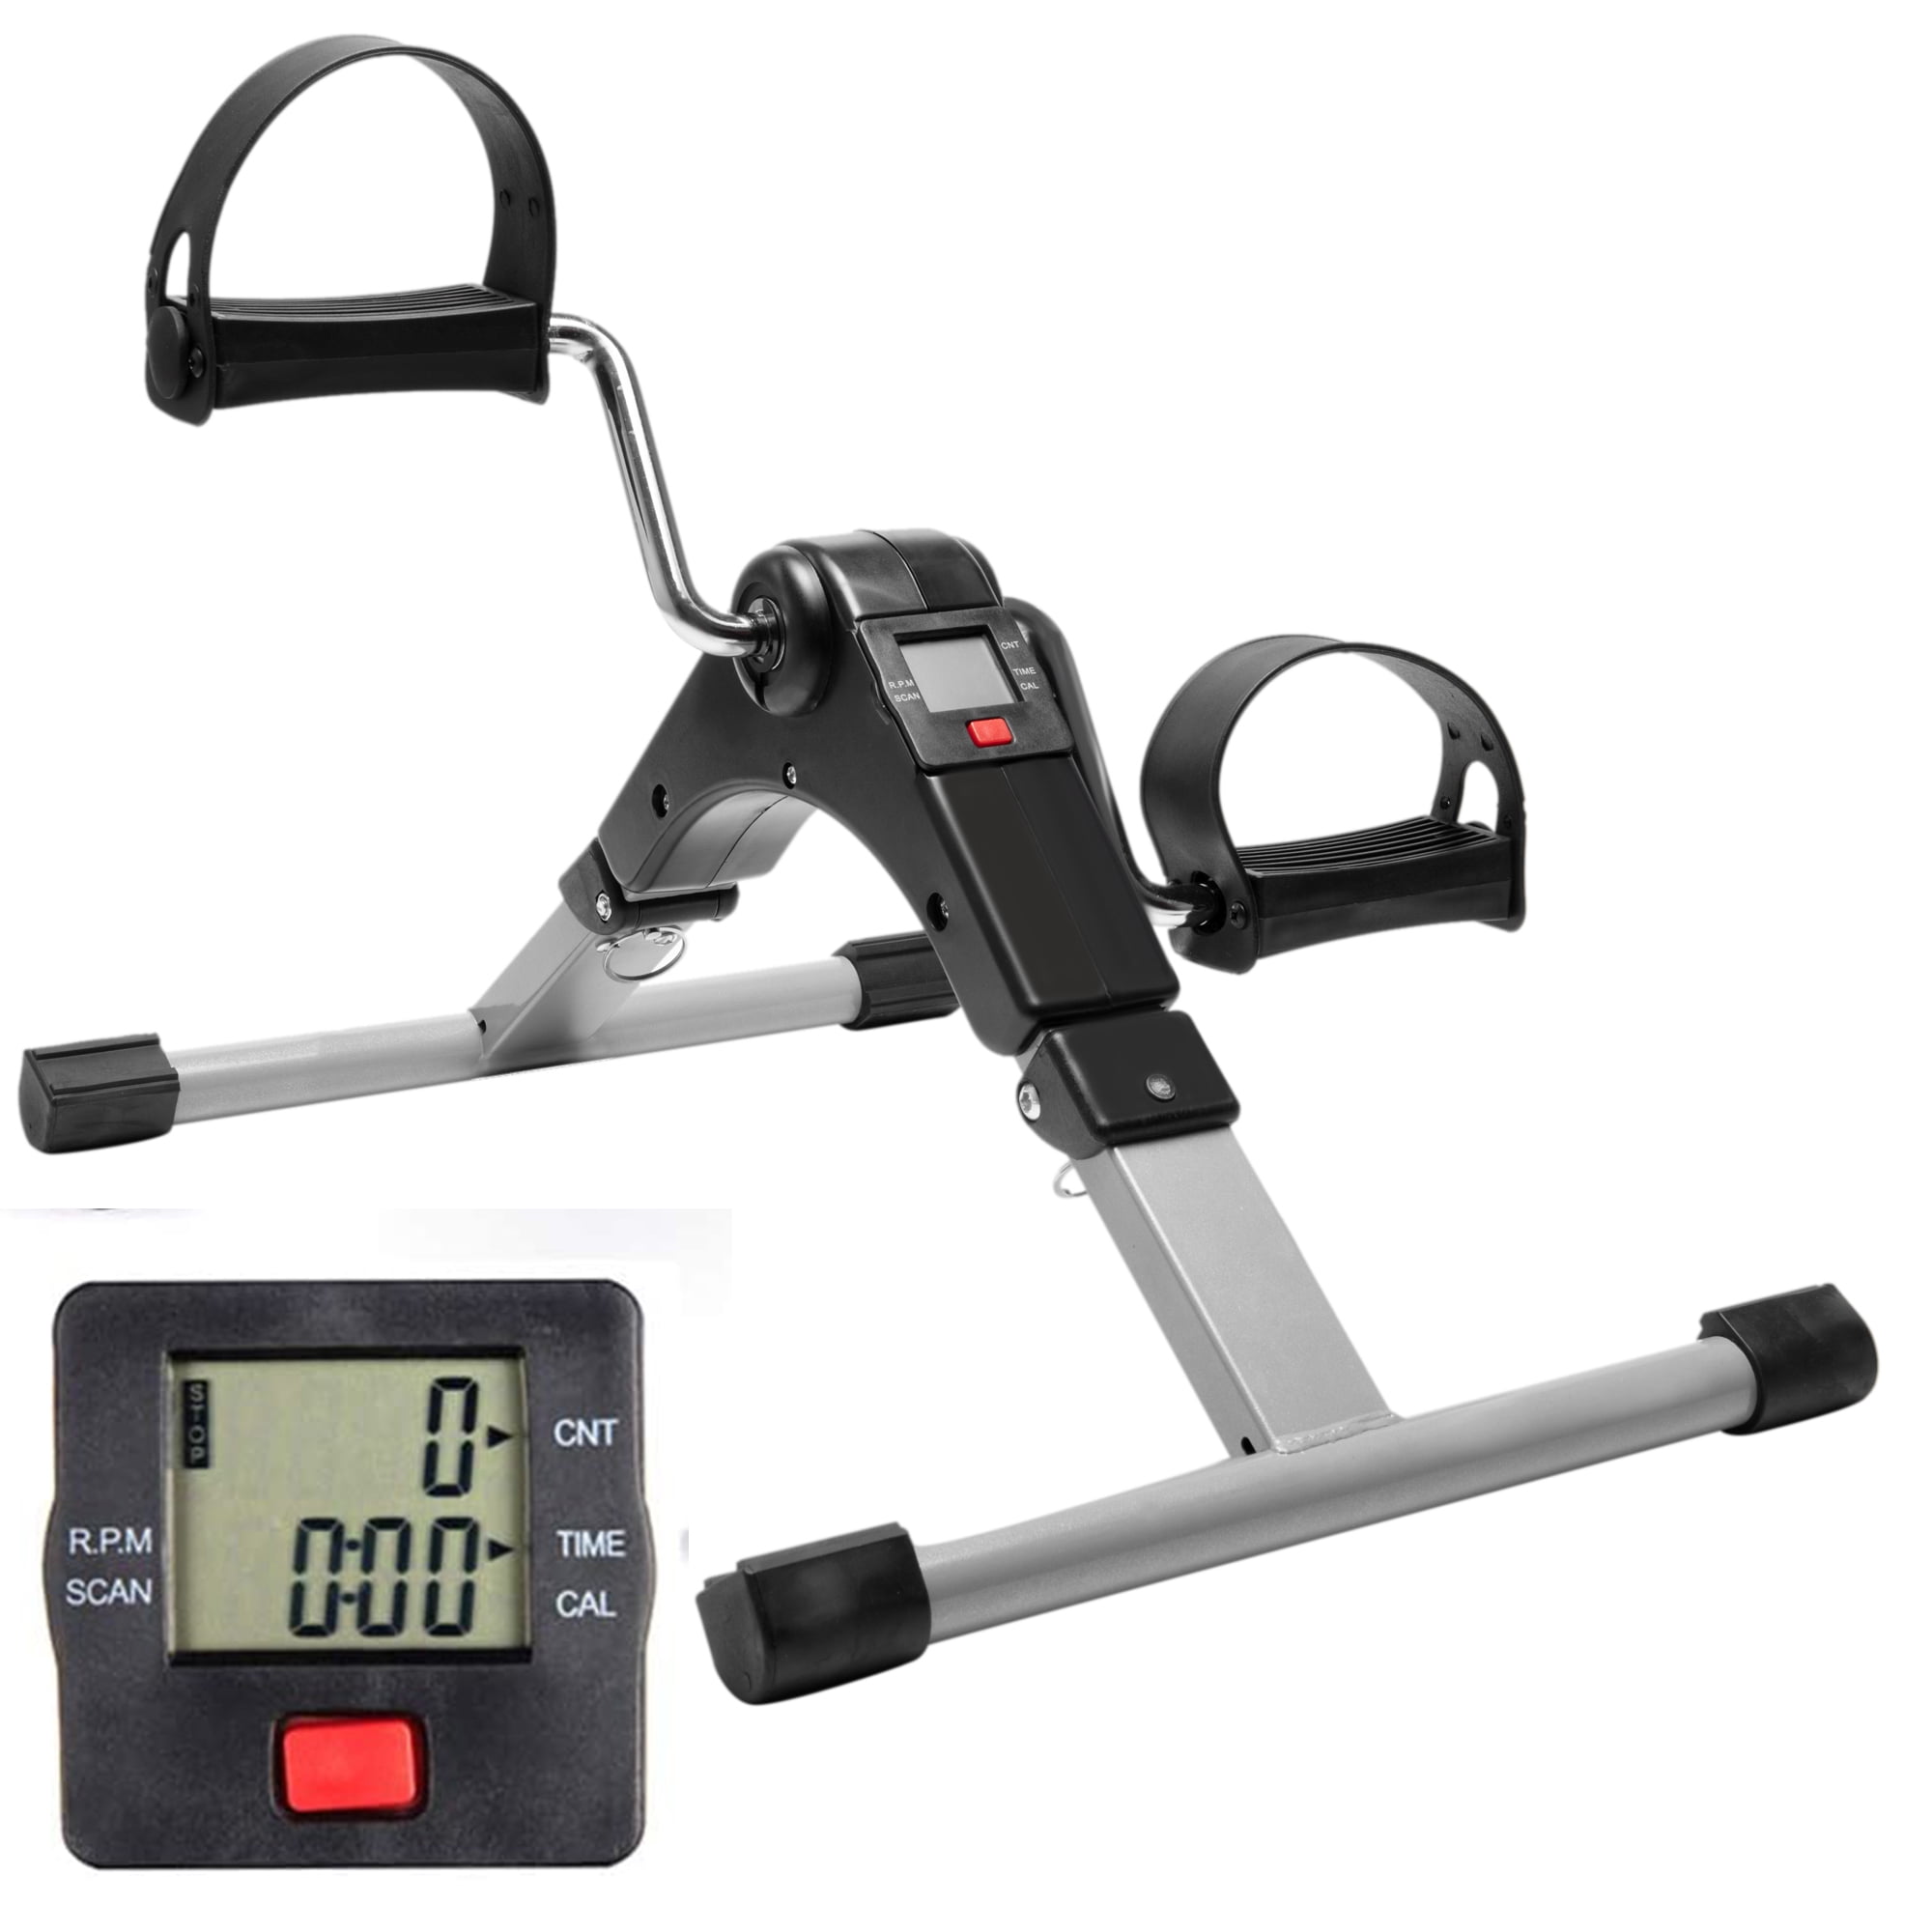 Details about   Portable Mini Exercise Bike Leg Arm Machine Cycle Pedal Home Use Trainning Gym 